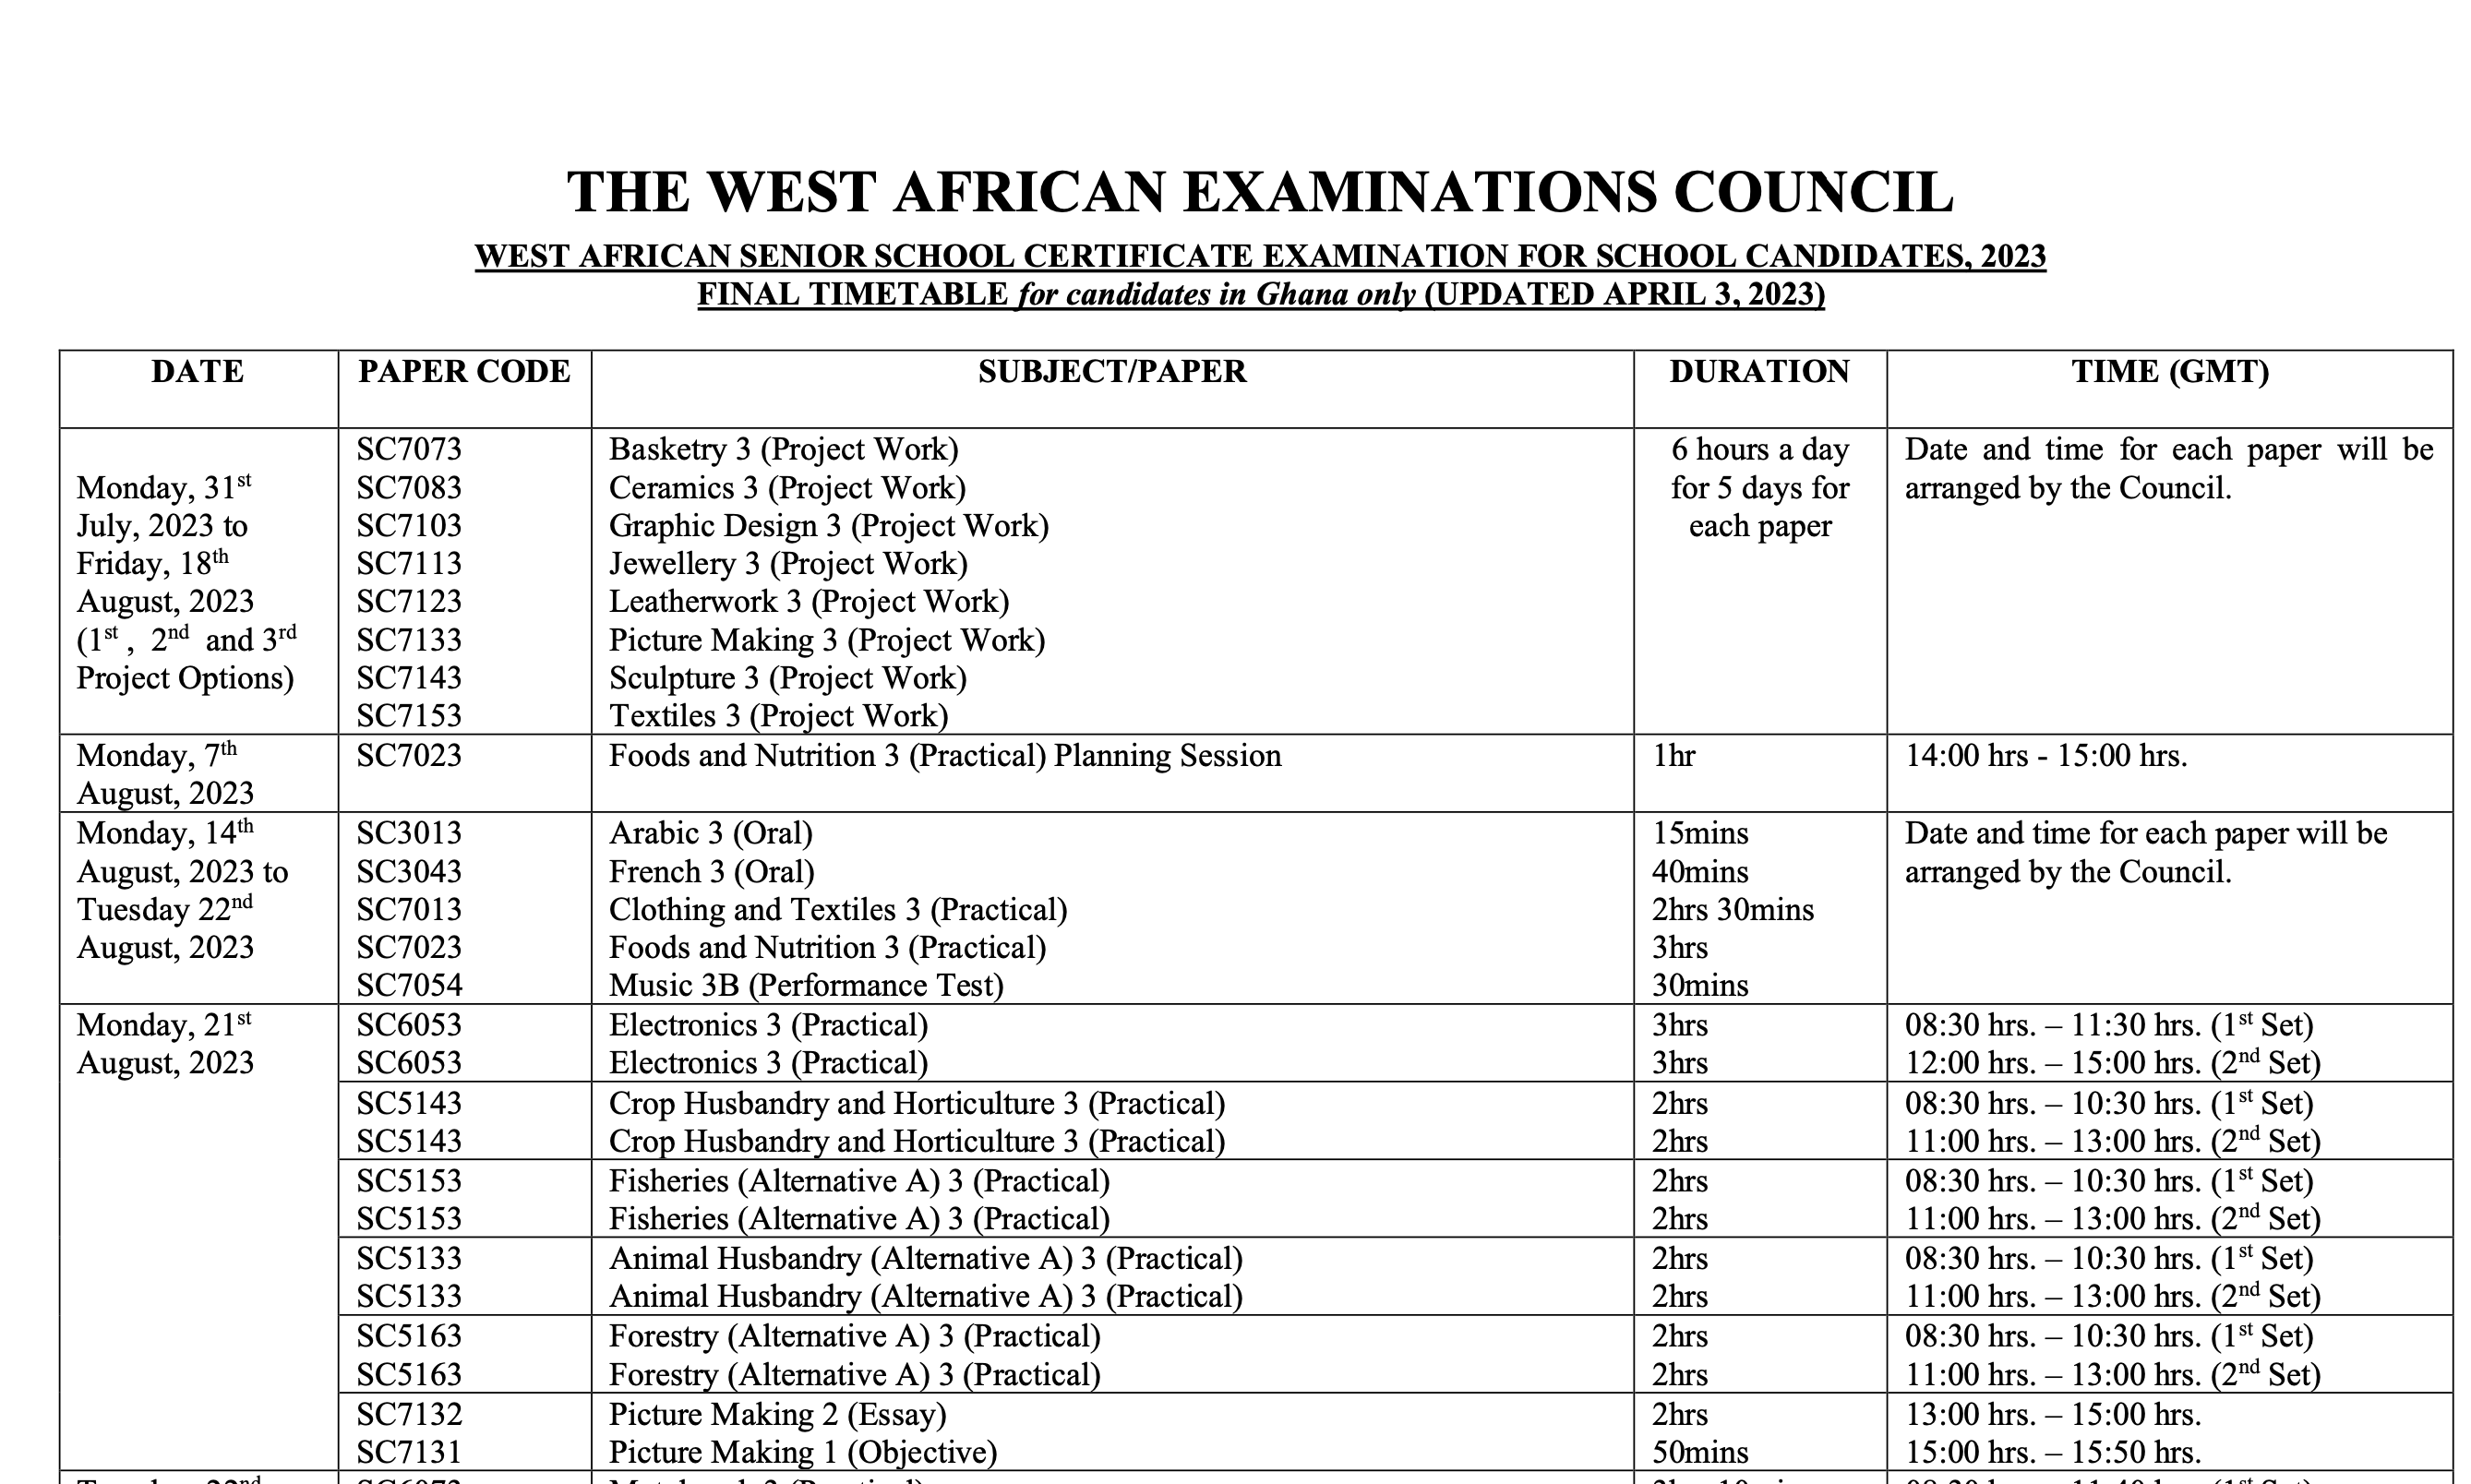 Wassce 2023 Timetable For School Candidates Out, Download Here